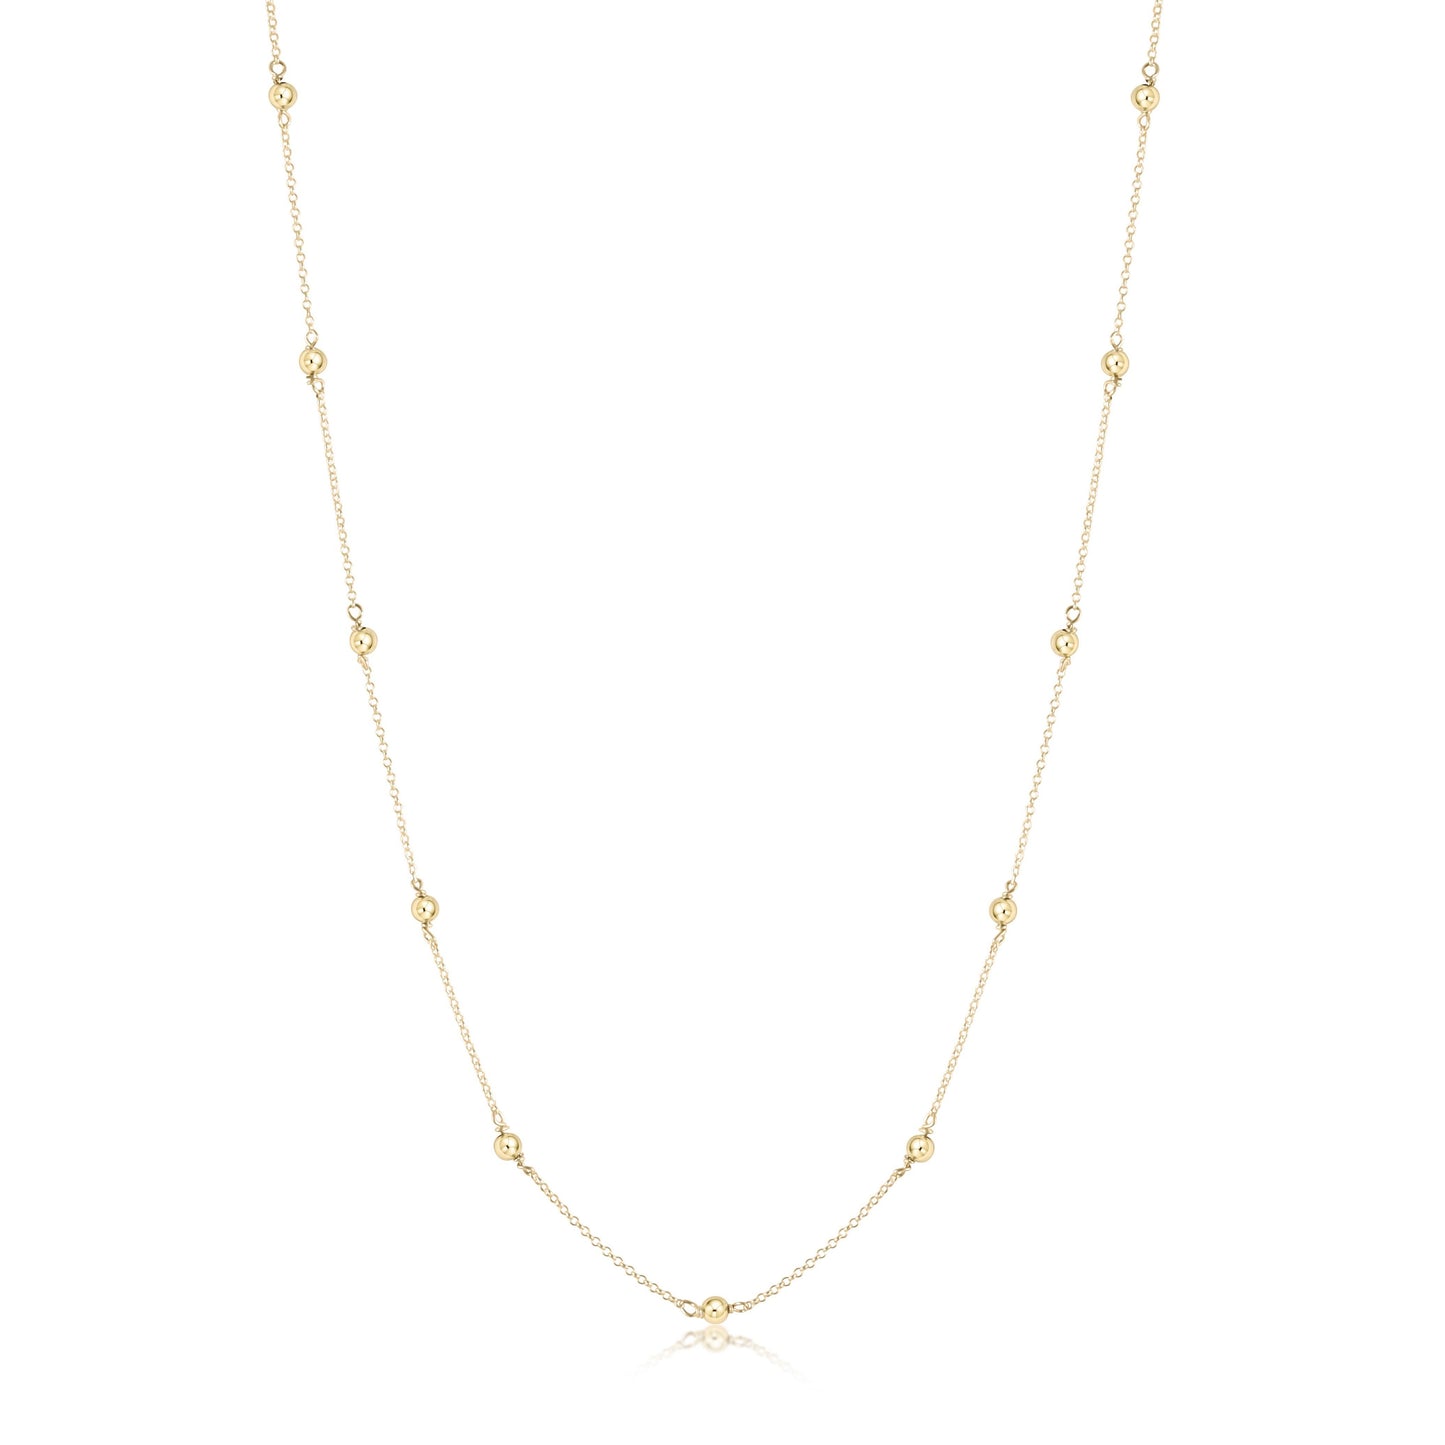 41" Necklace Simplicity Chain Gold - Bead